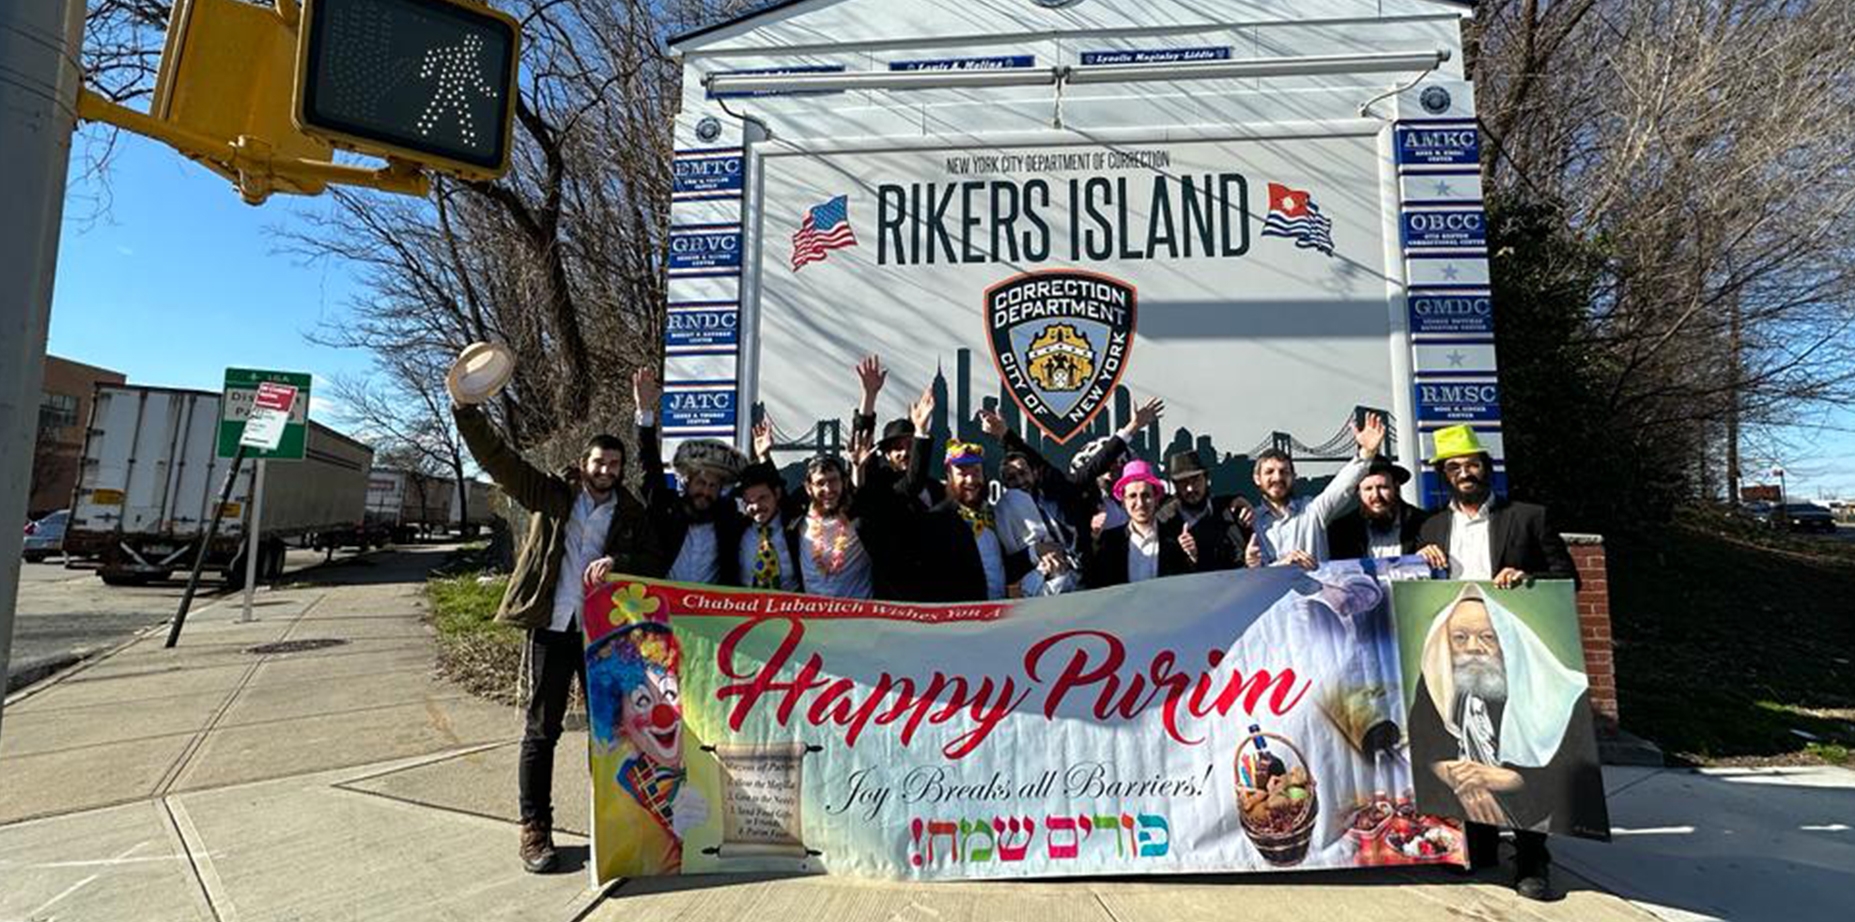 The Lubavitch Youth Organization outside of Rikers Island doing outreach work during Purim. (Courtesy)